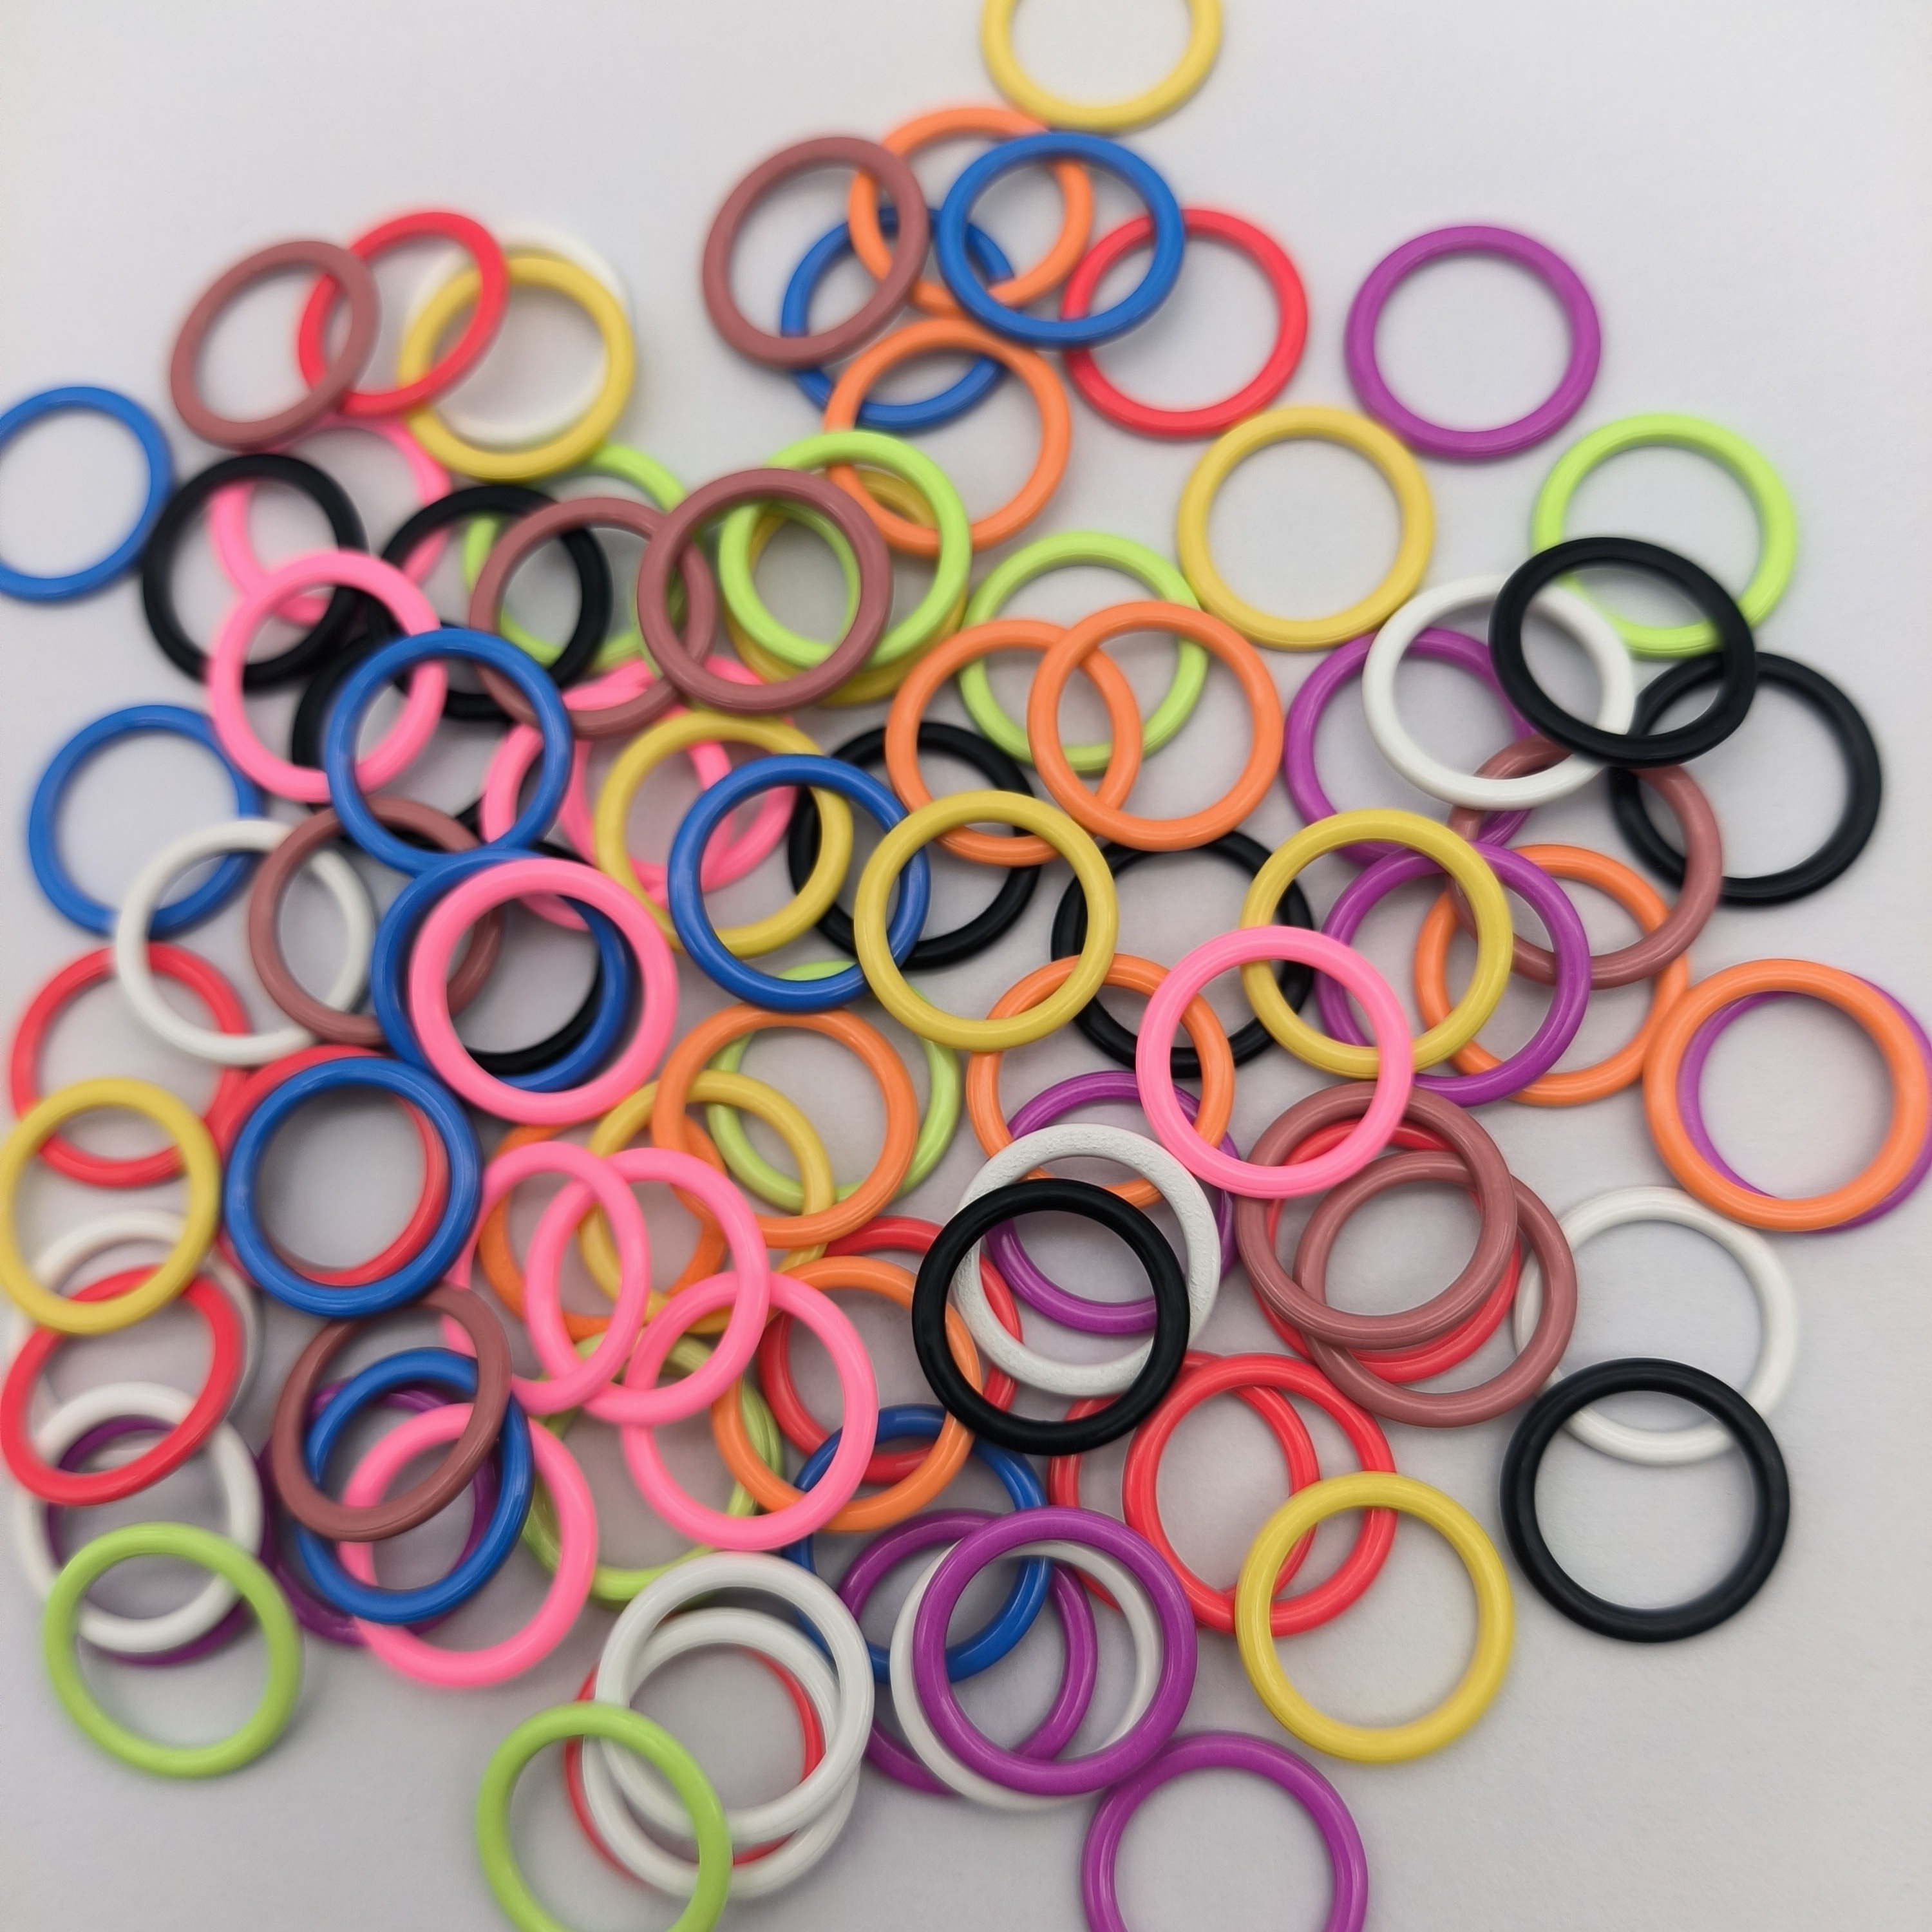 240 Pieces Knitting Stitch Marker Plastic Smooth Coloured O-Rings with Clear Storage Box Crochet Ring Assorted Knitting Needle Clip Multiple-Size